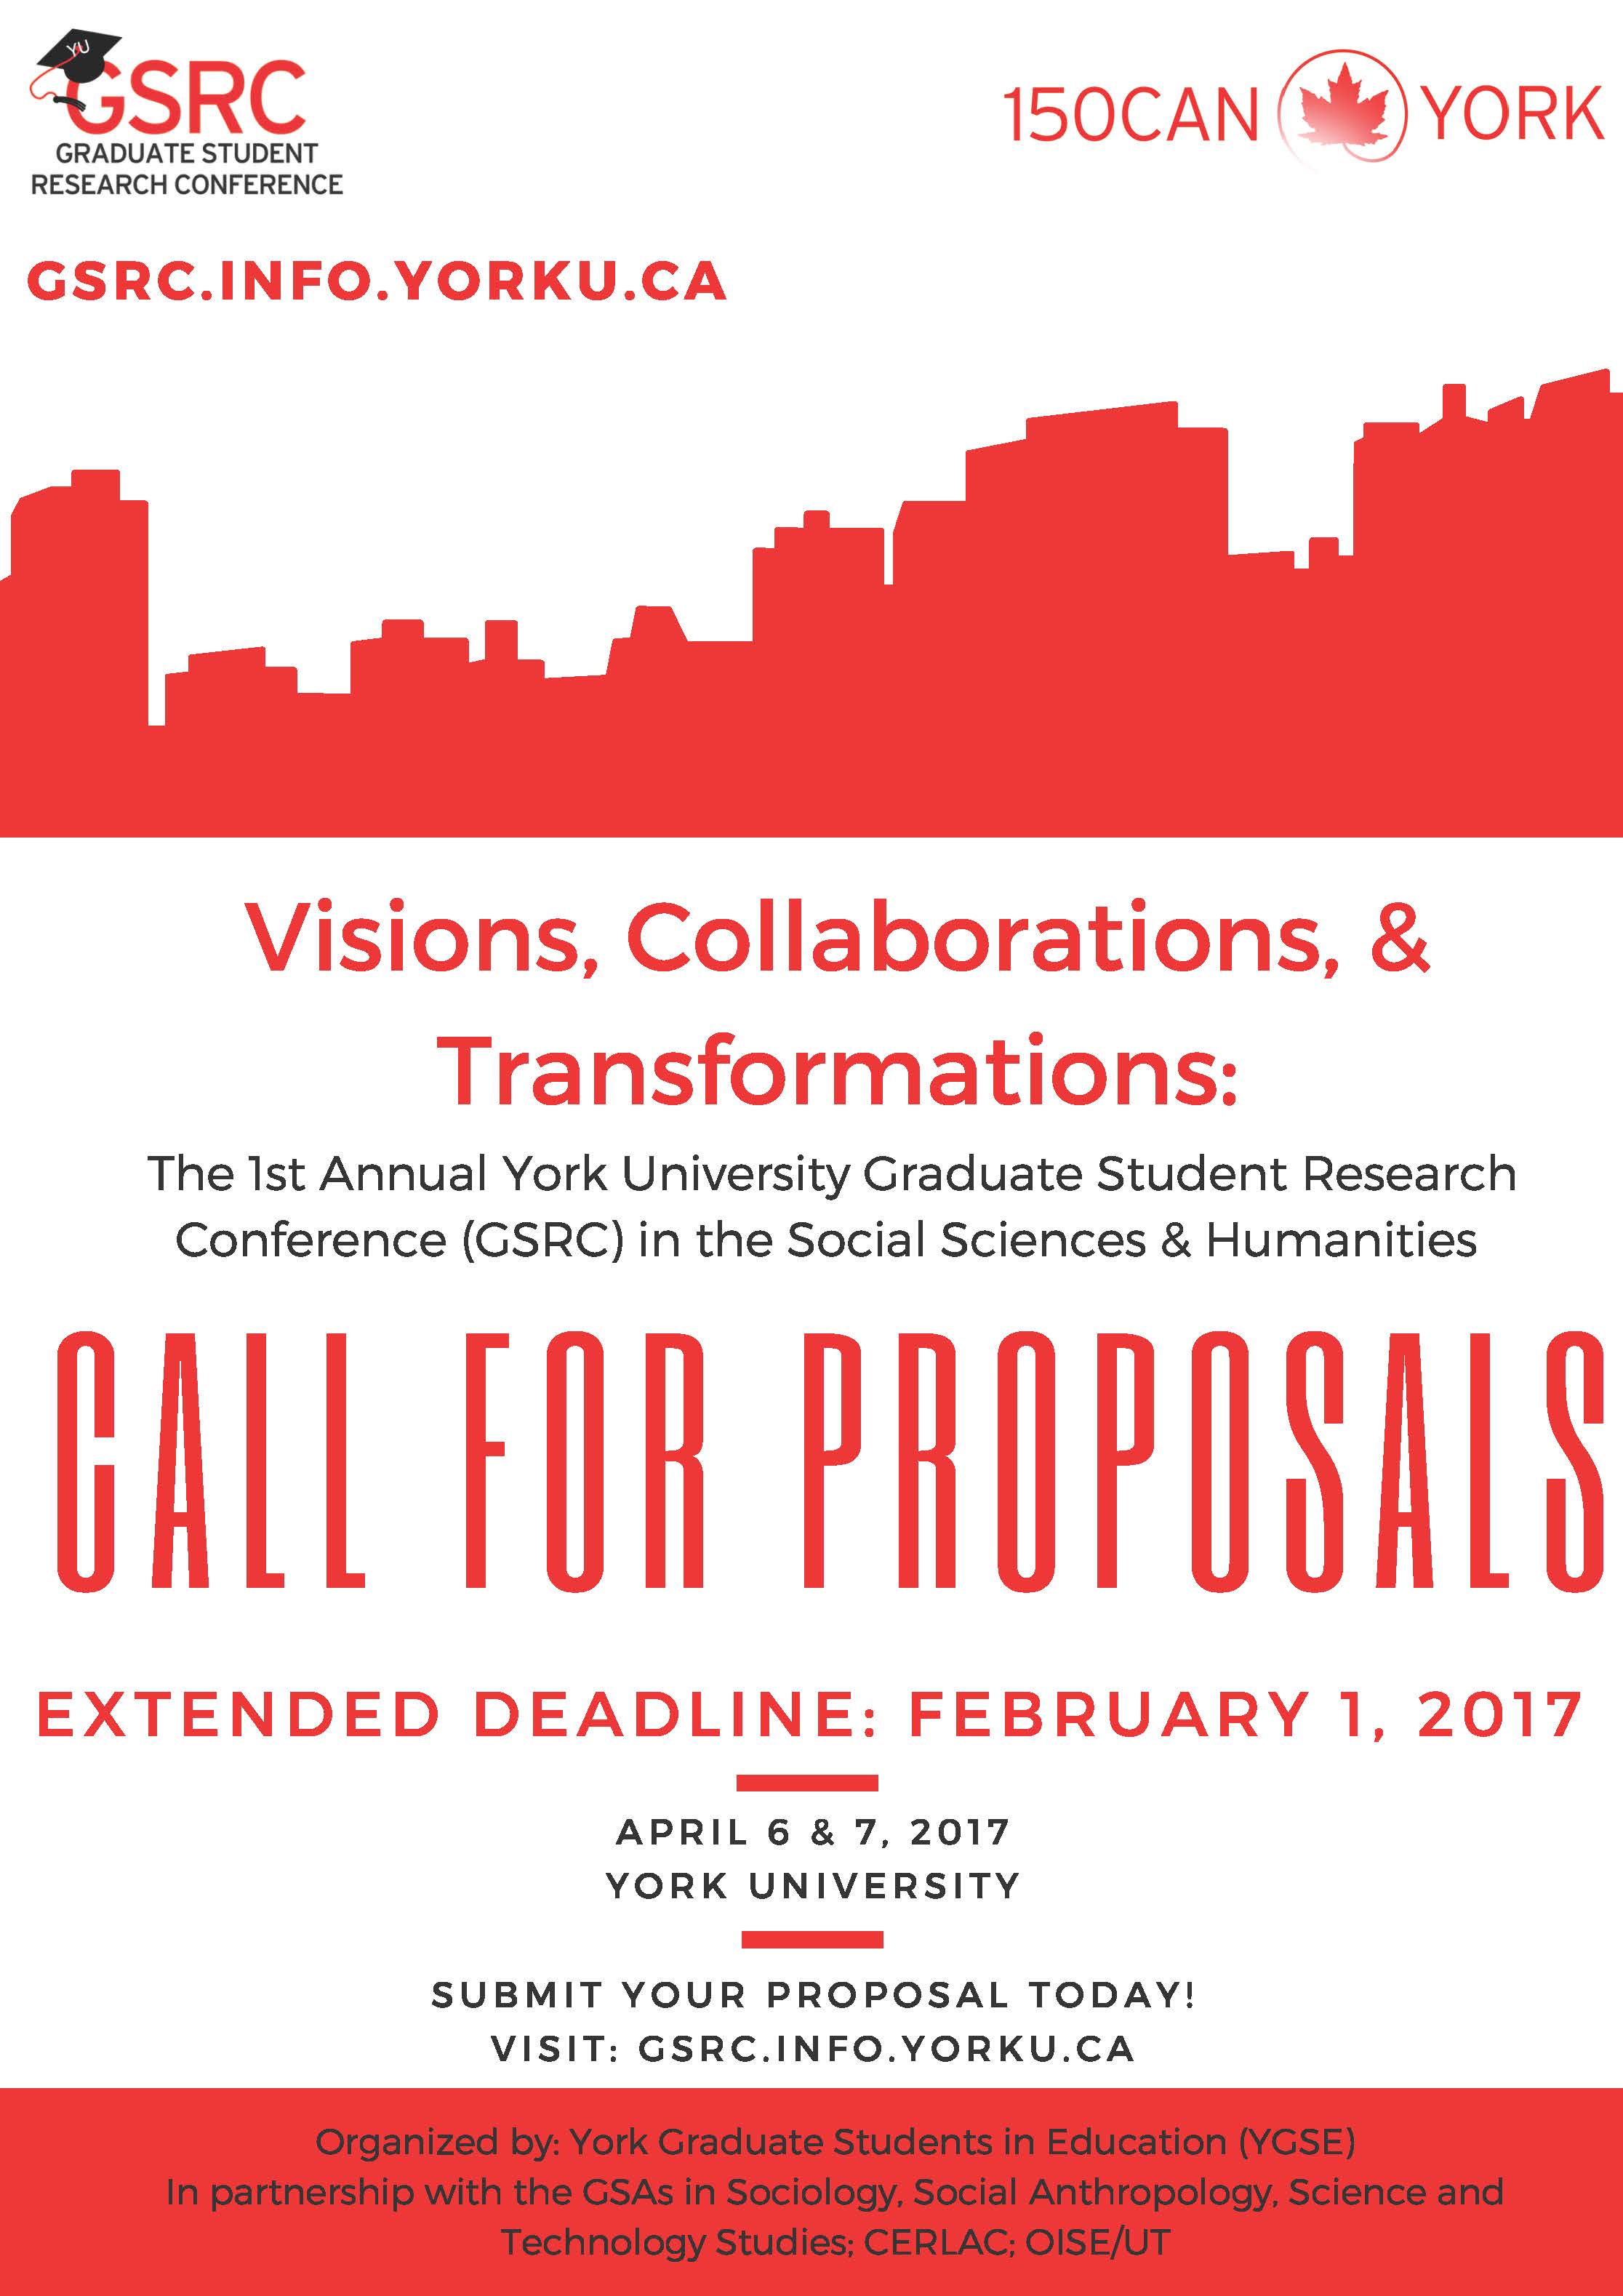 GSRC - Call for Proposals 